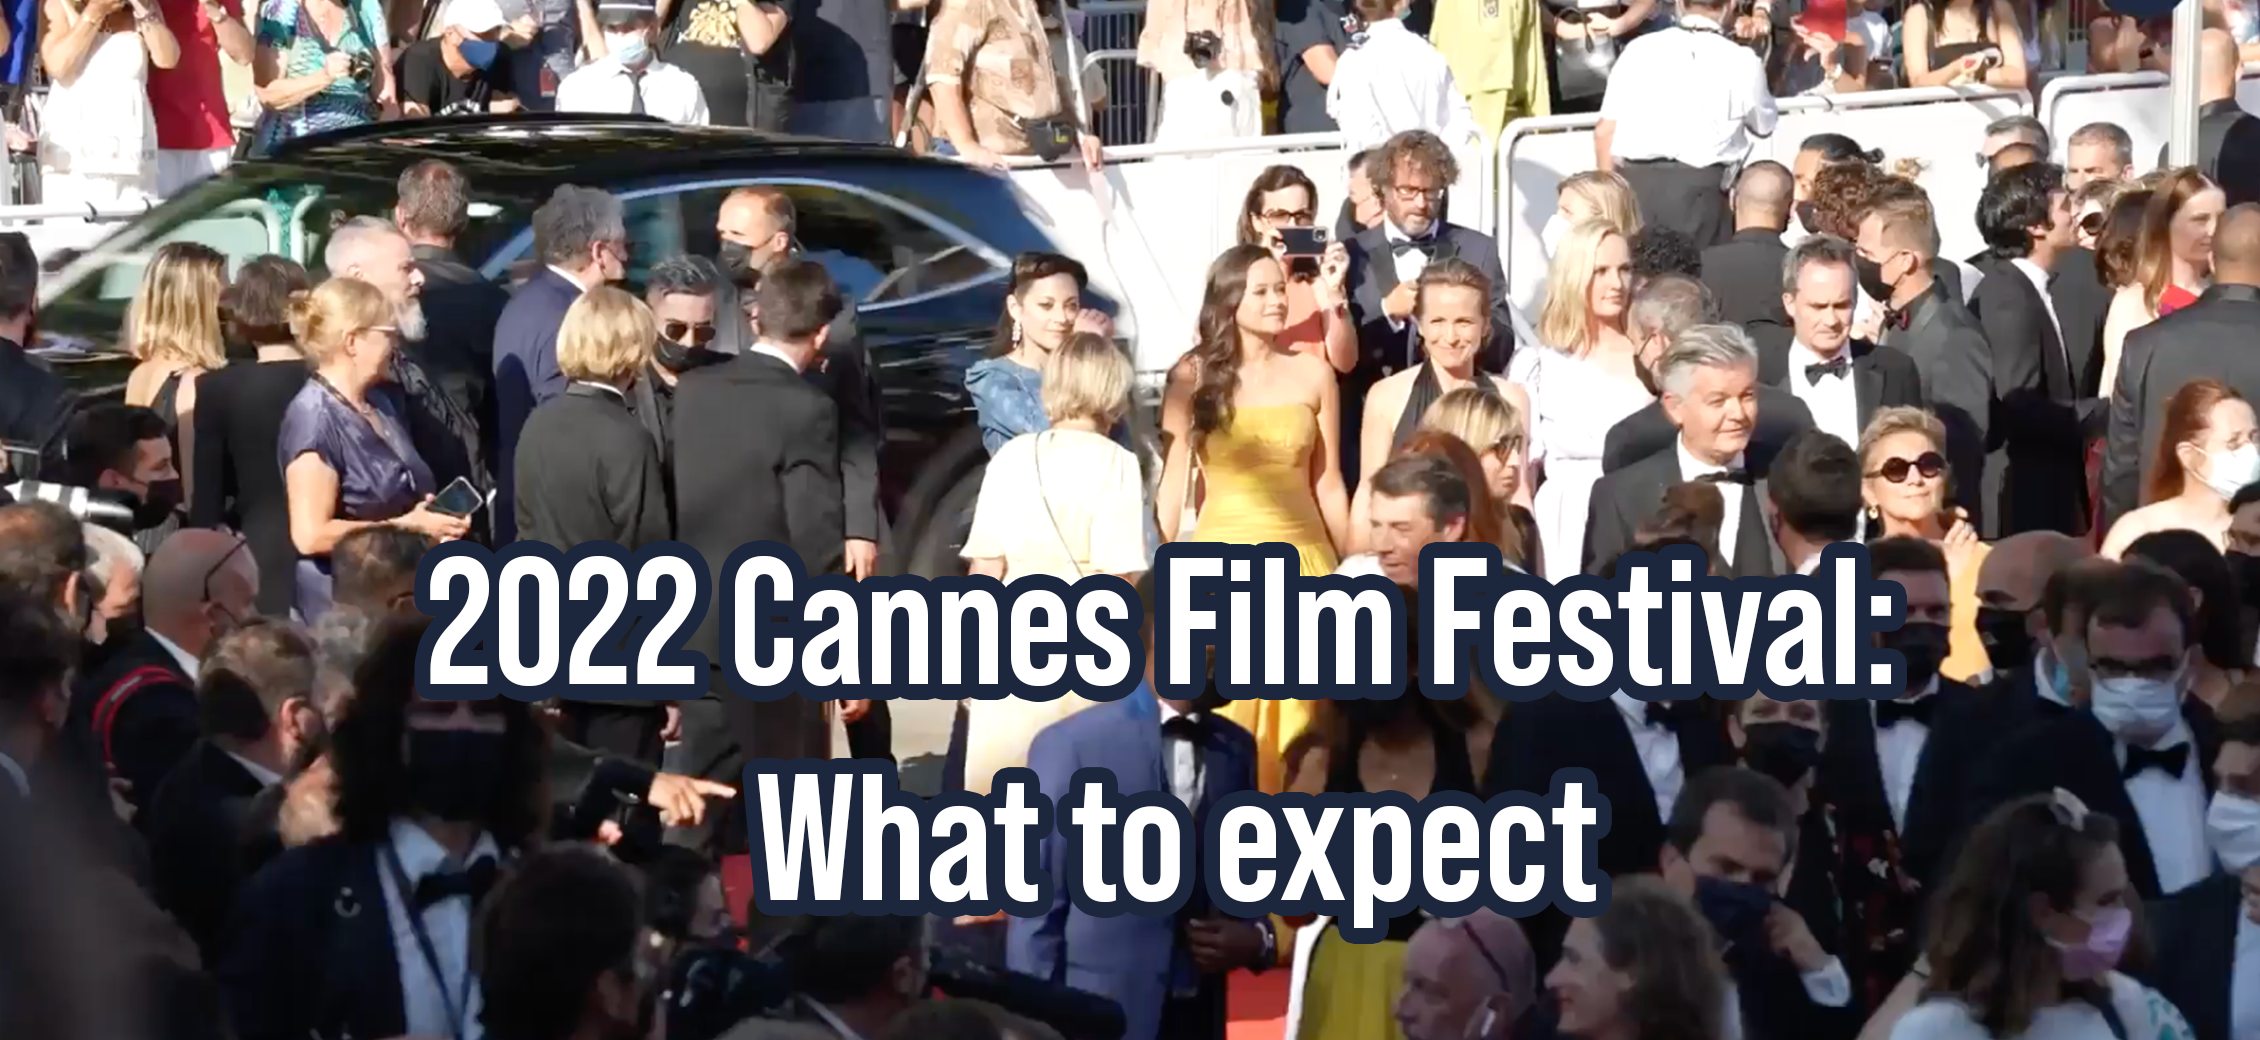 2022 Cannes Film Festival: What to expect